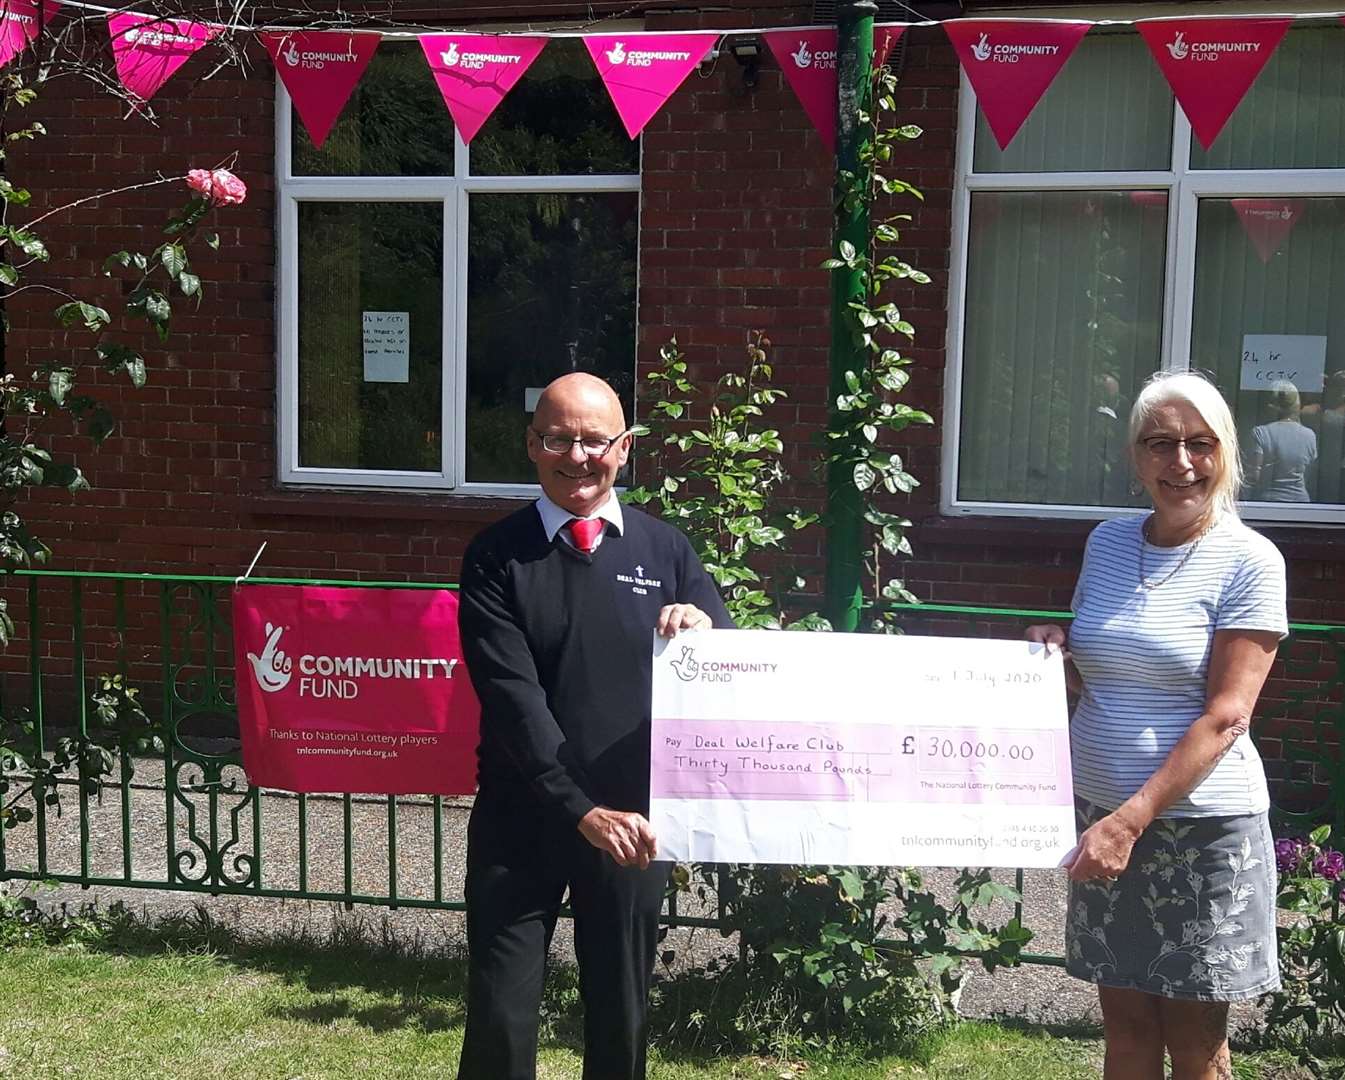 Deal Welfare Club chairman Lee Bowman with treasurer Diane Ashmore with the £30,000 cheque from the National Lottery to pay for meals for financially vulnerable families